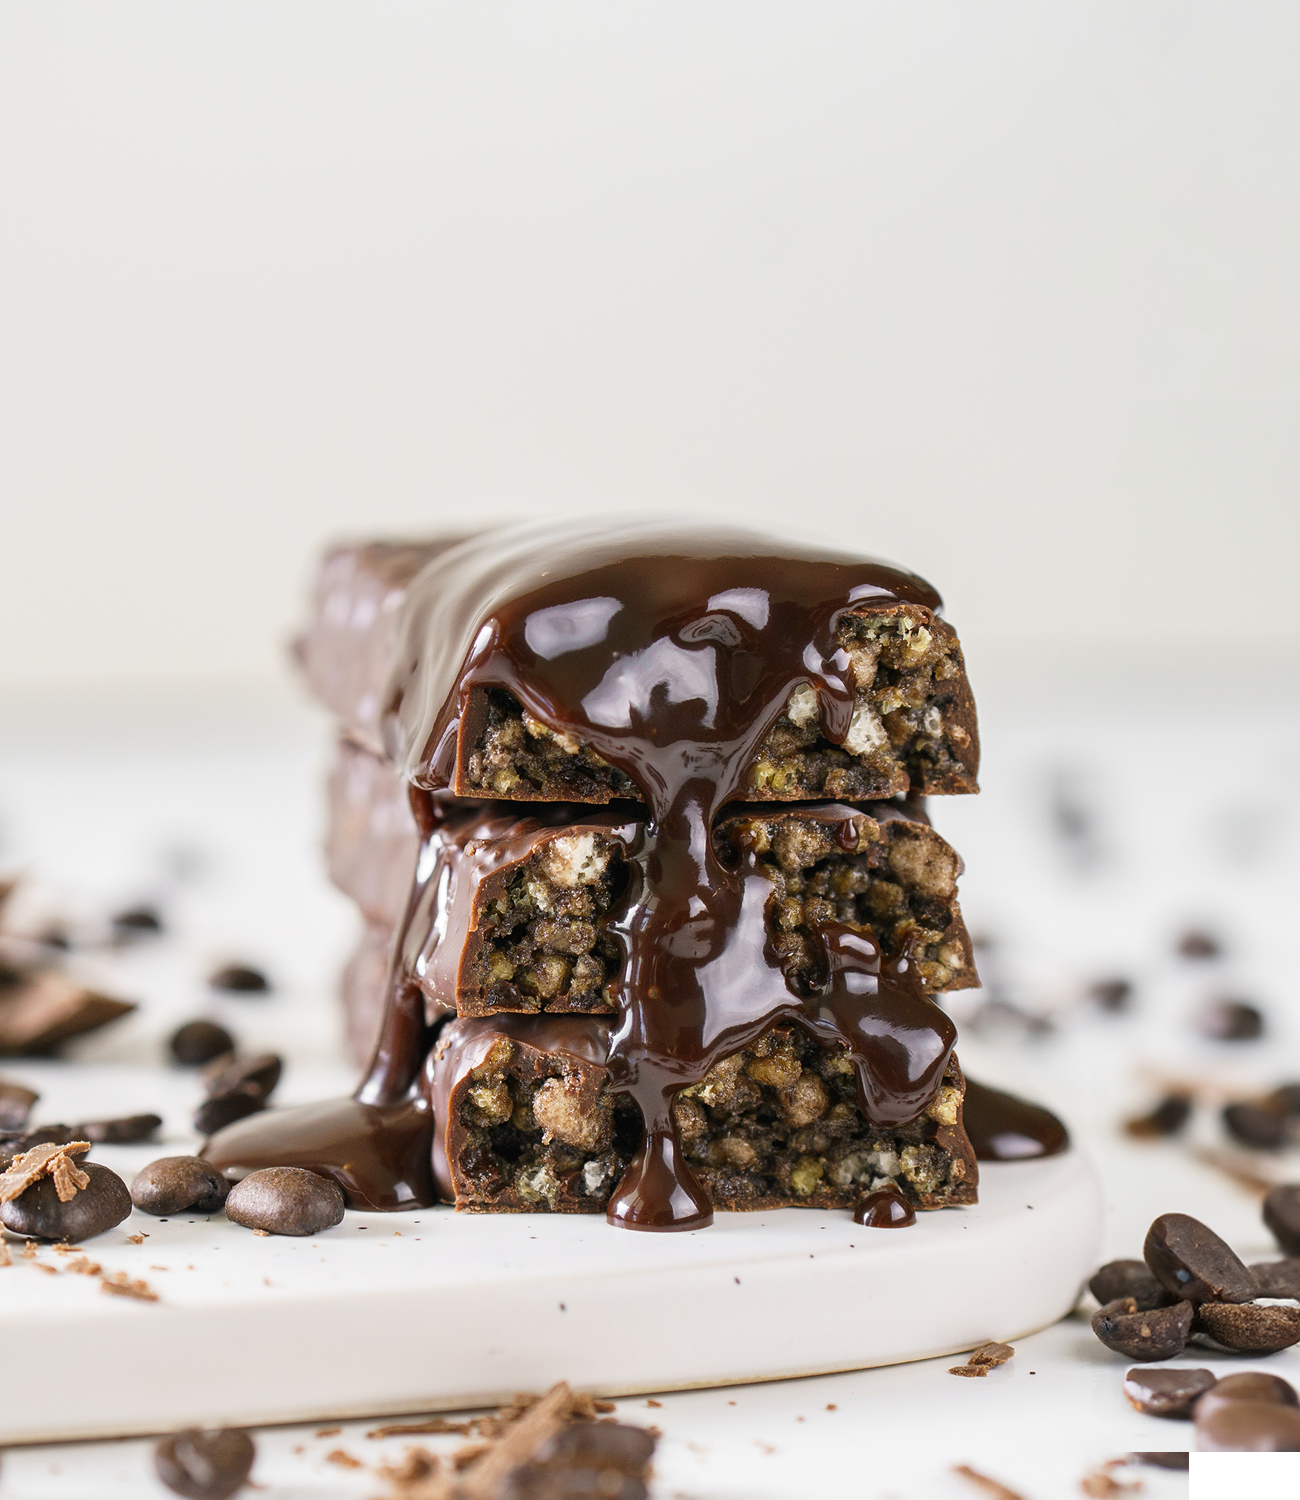 Dark Chocolate Drizzle on Chocolate Protein Bar surrounded by Chocolate Chips